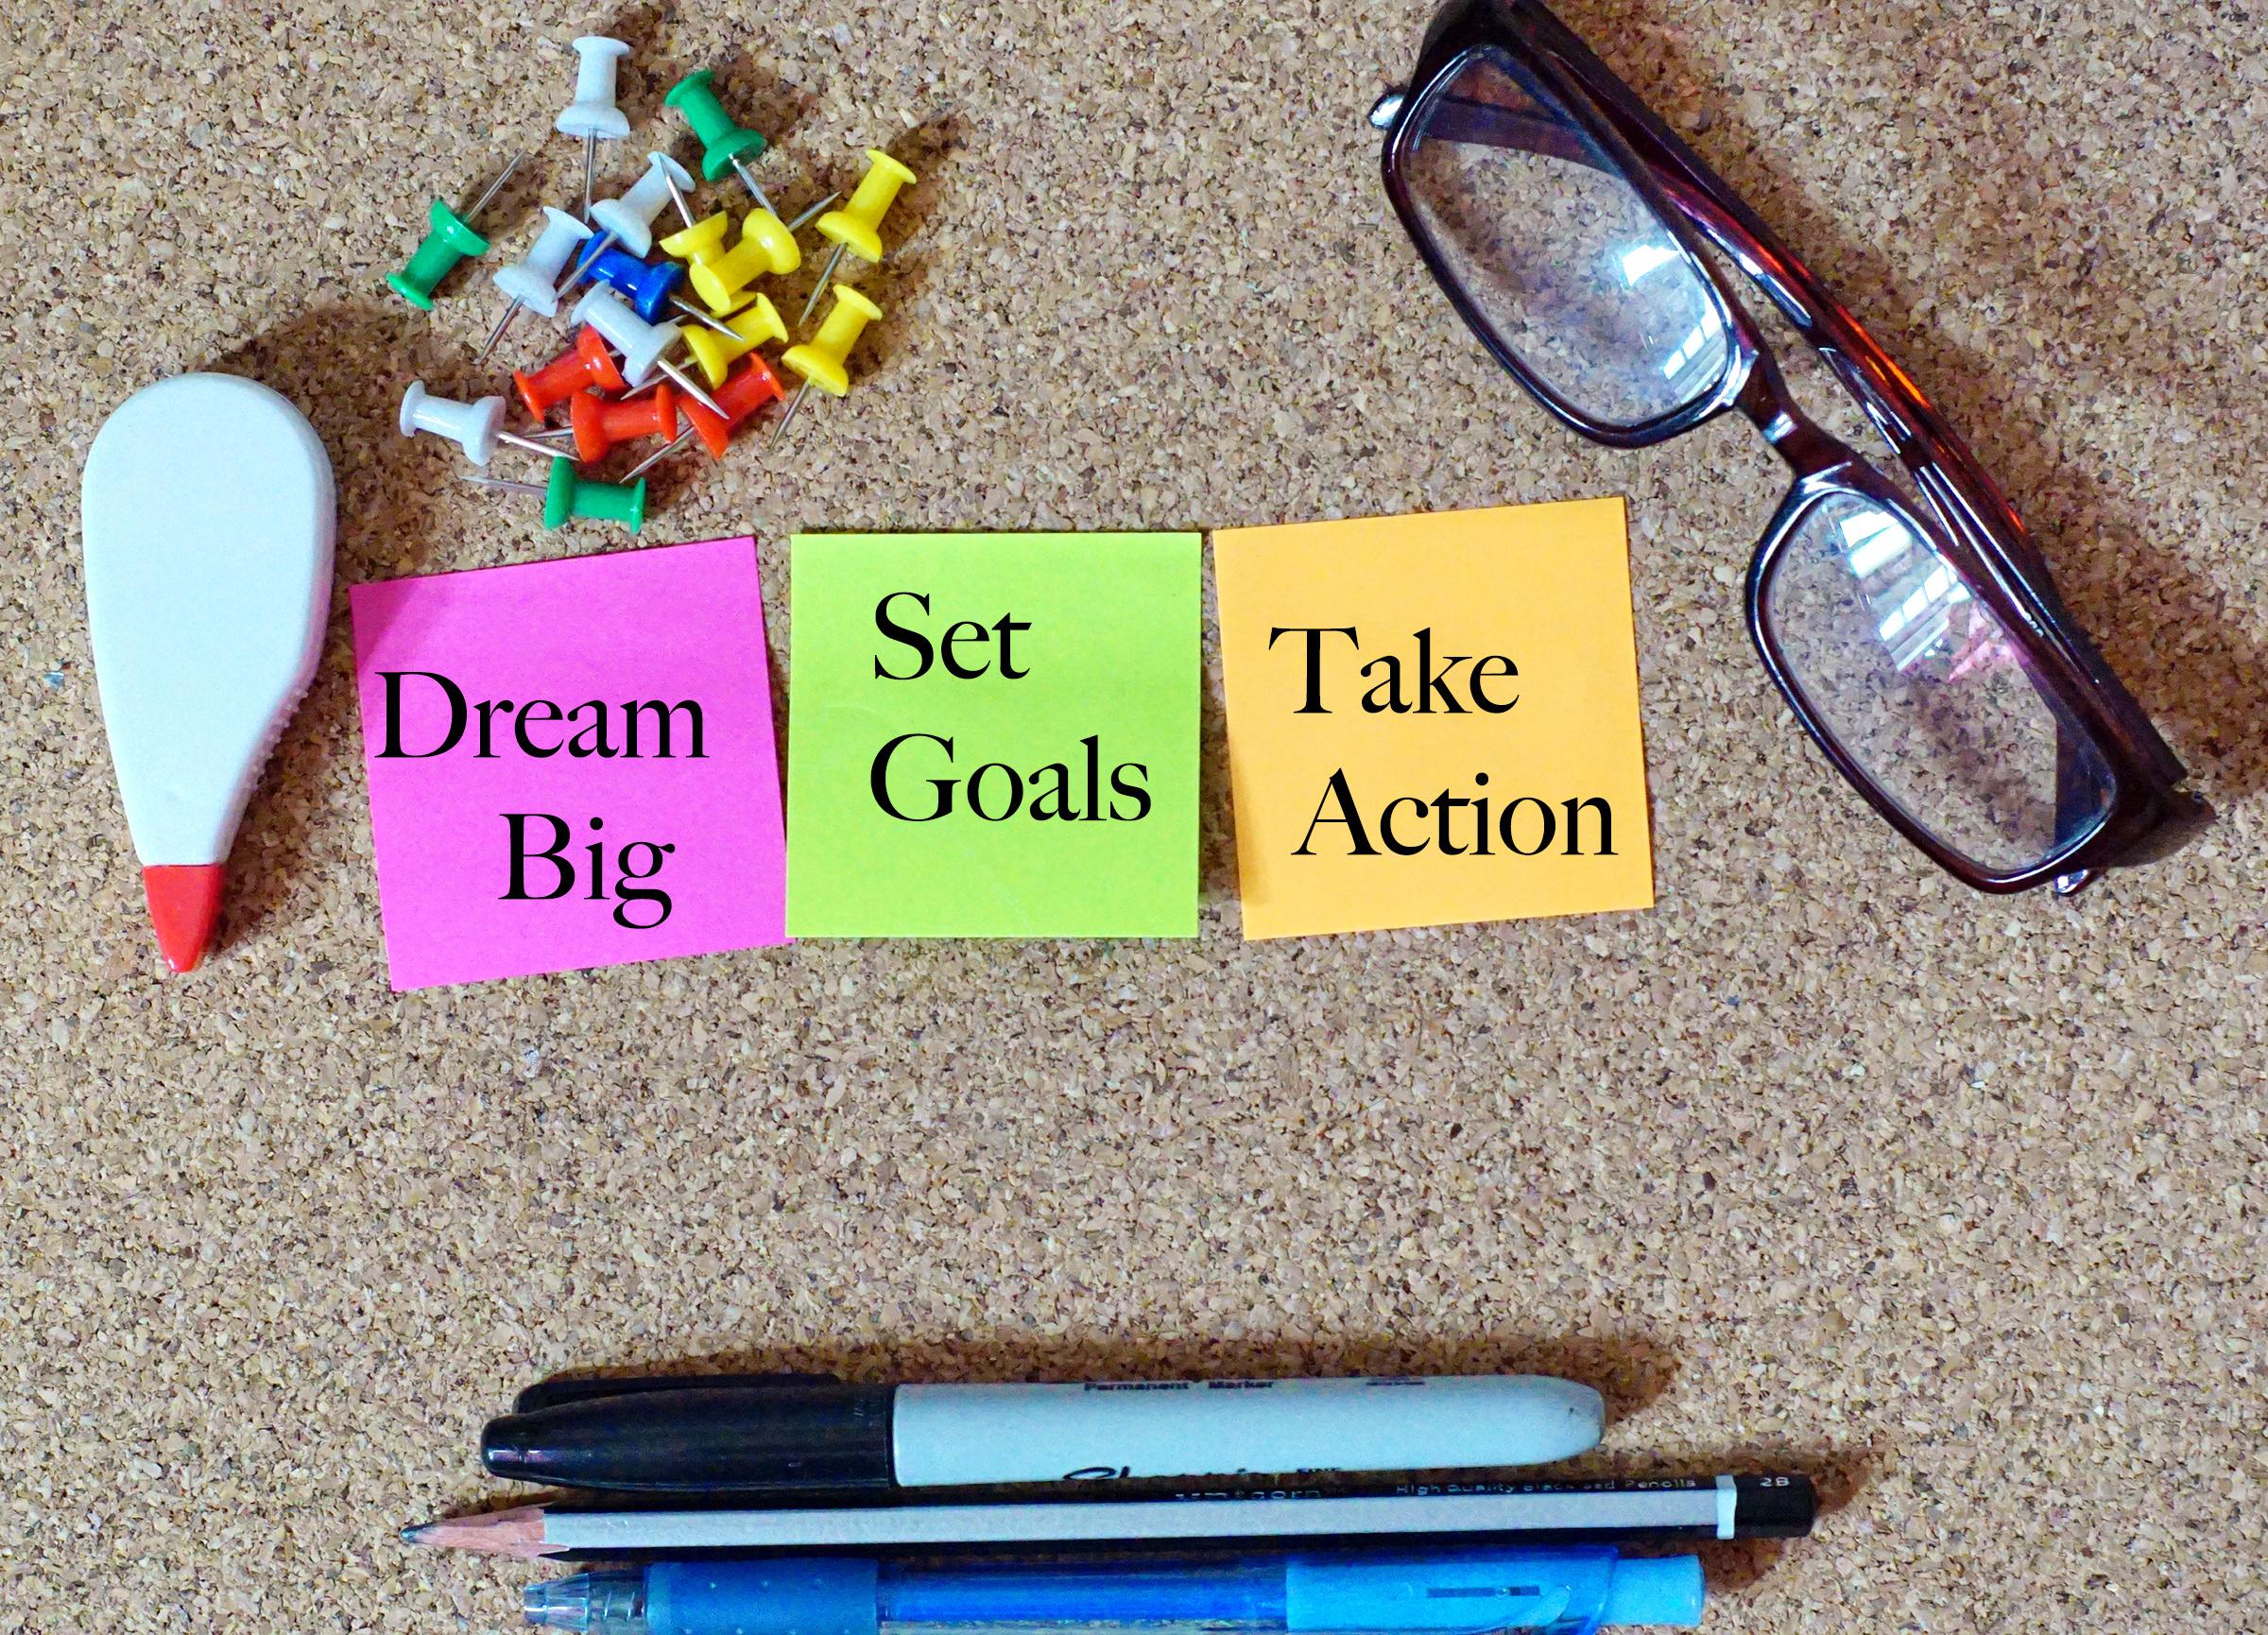 An image of 3 Post-it notes that read, "Dream Big" "Set Goals" and "Take Action".